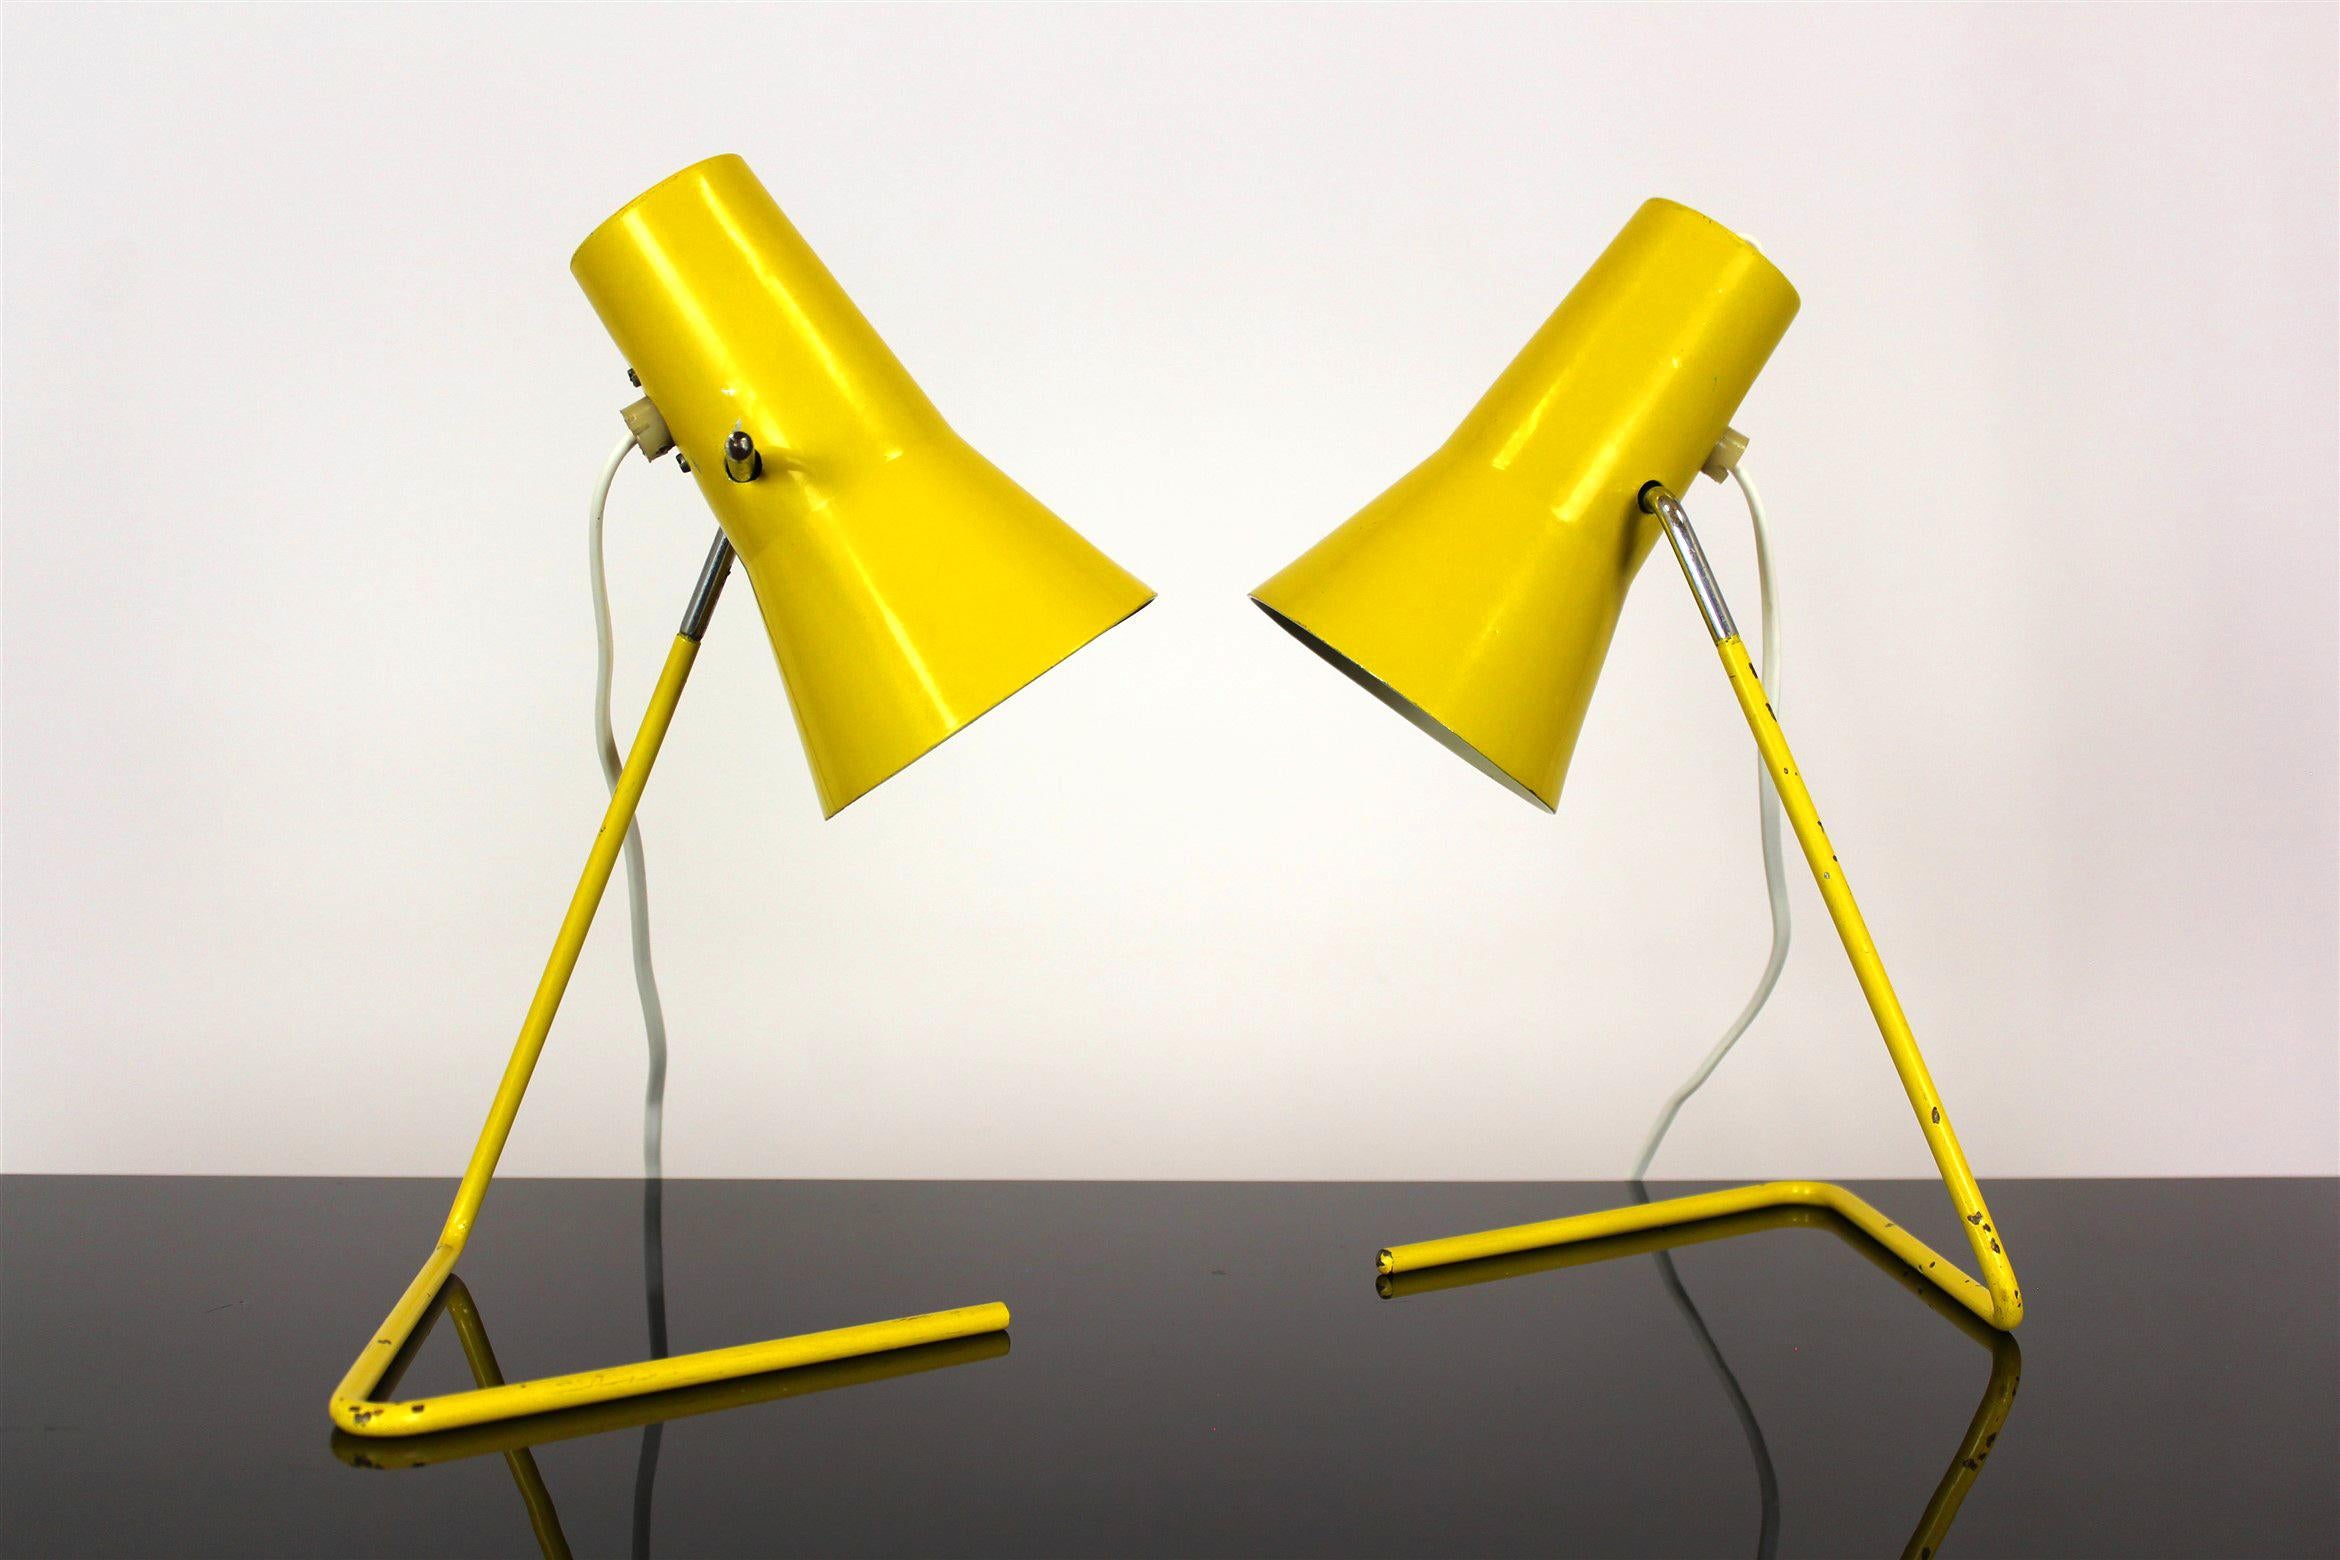 
These yellow table lamps were manufactured by Drupol and designed by Josef Hurka in the mid 1960s. Original, good condition, fully functional. The wires were replaced with new ones.